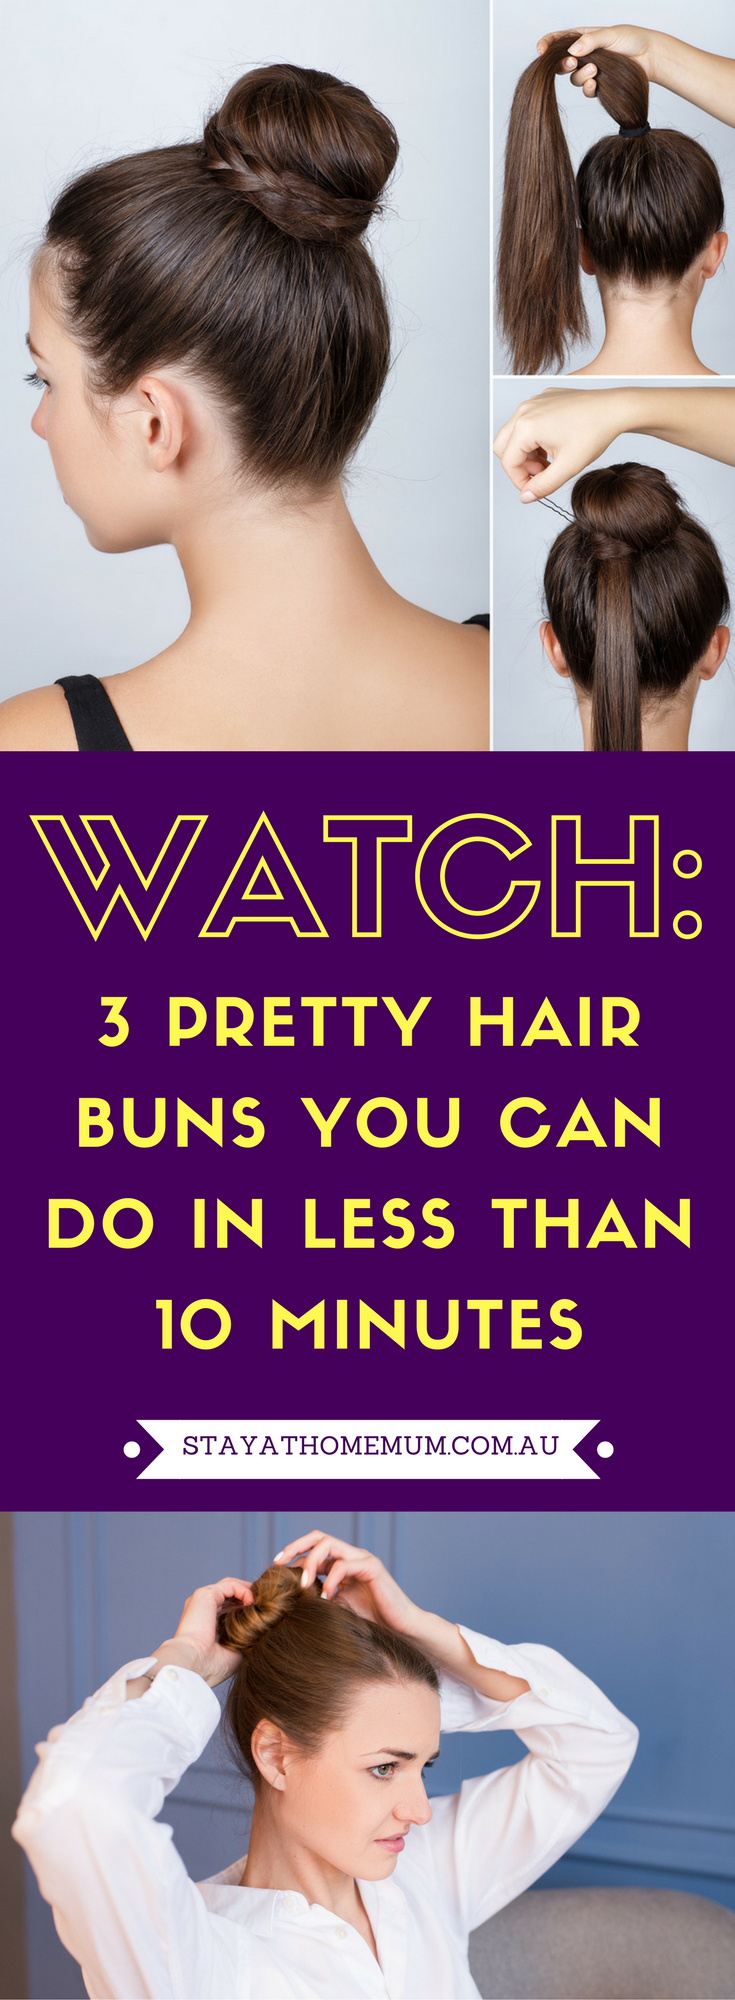 WATCH- 3 Pretty Hair Buns You Can Do In Less Than 10 Minutes (1)